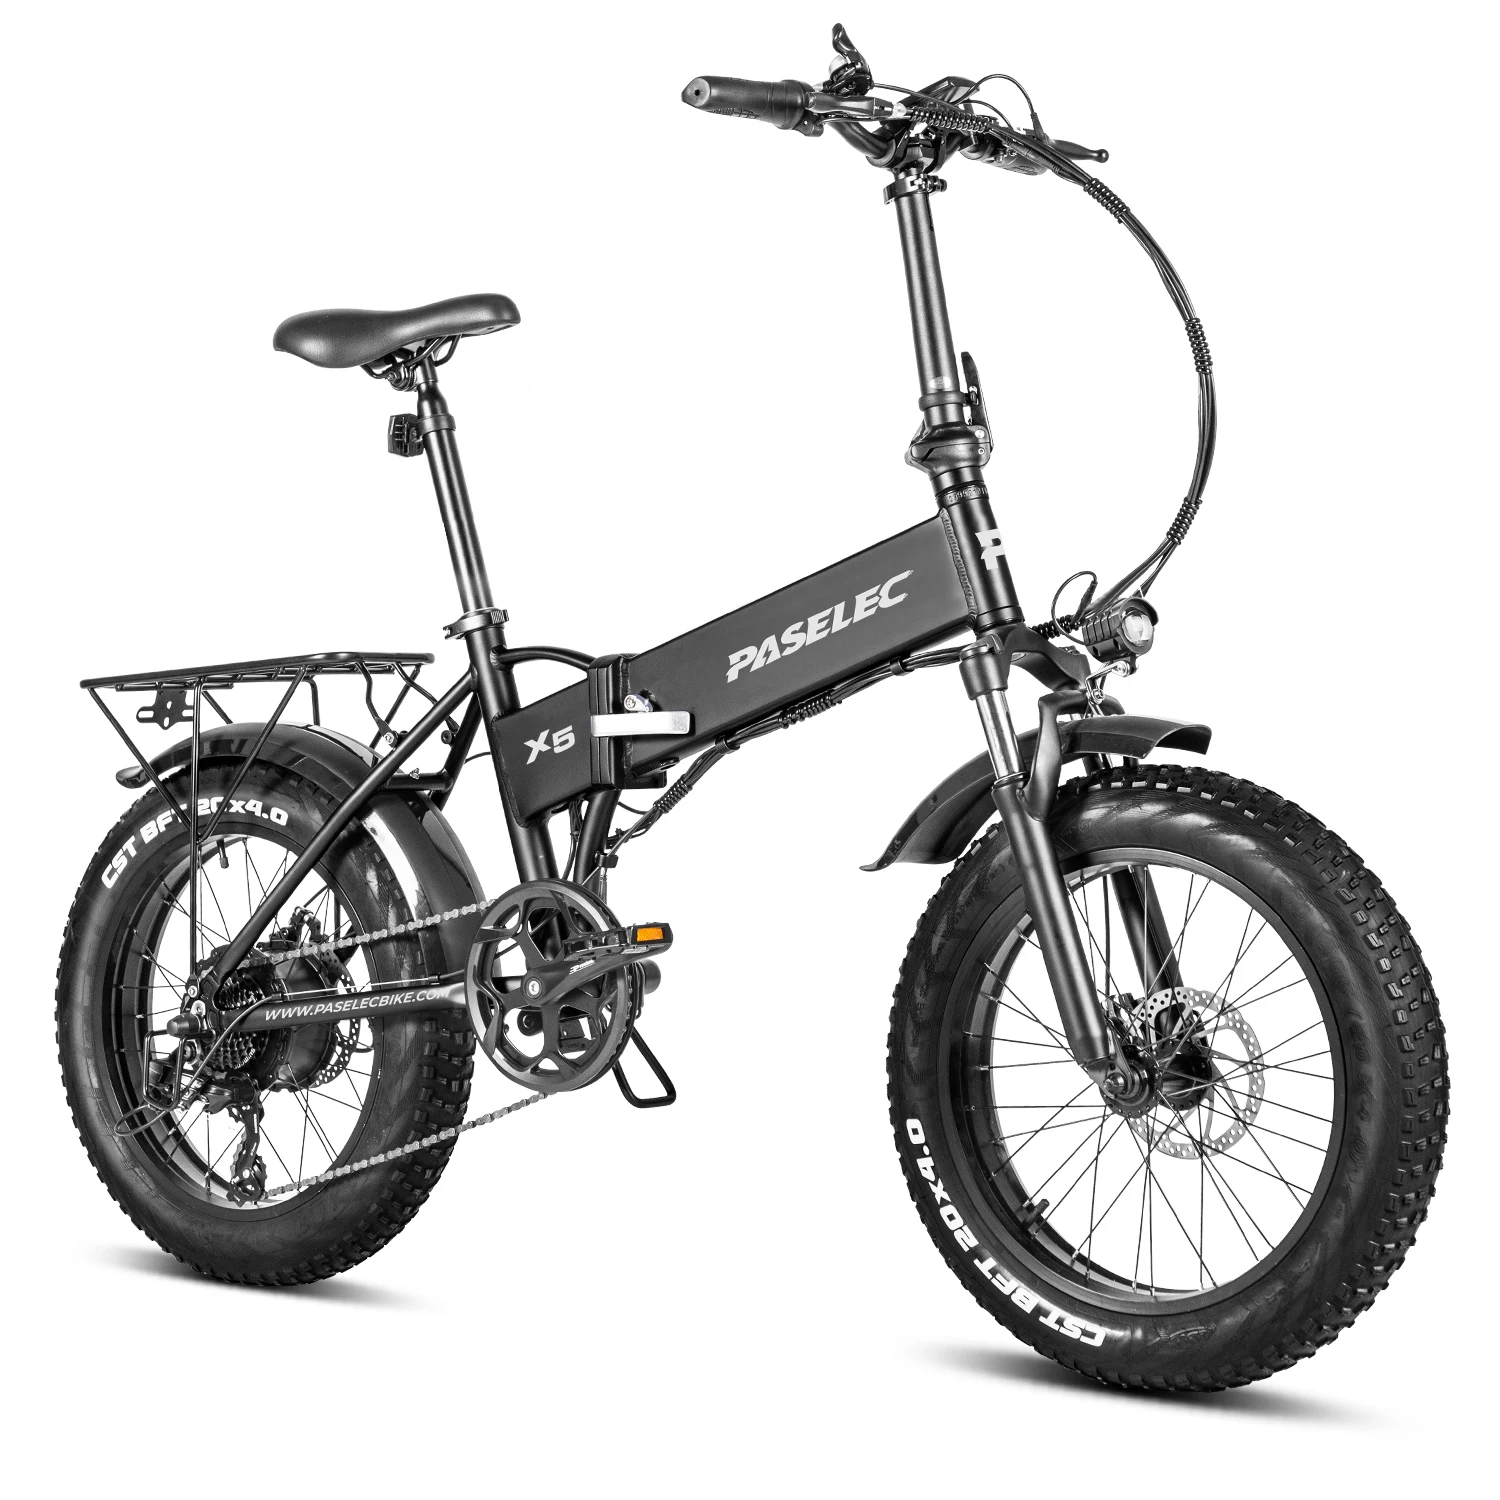 

PASELEC 500W Fat Tire Electric Bike 20" Folding Fat bicycle With 48V 10.4Ah Lithium Battery LCD Display